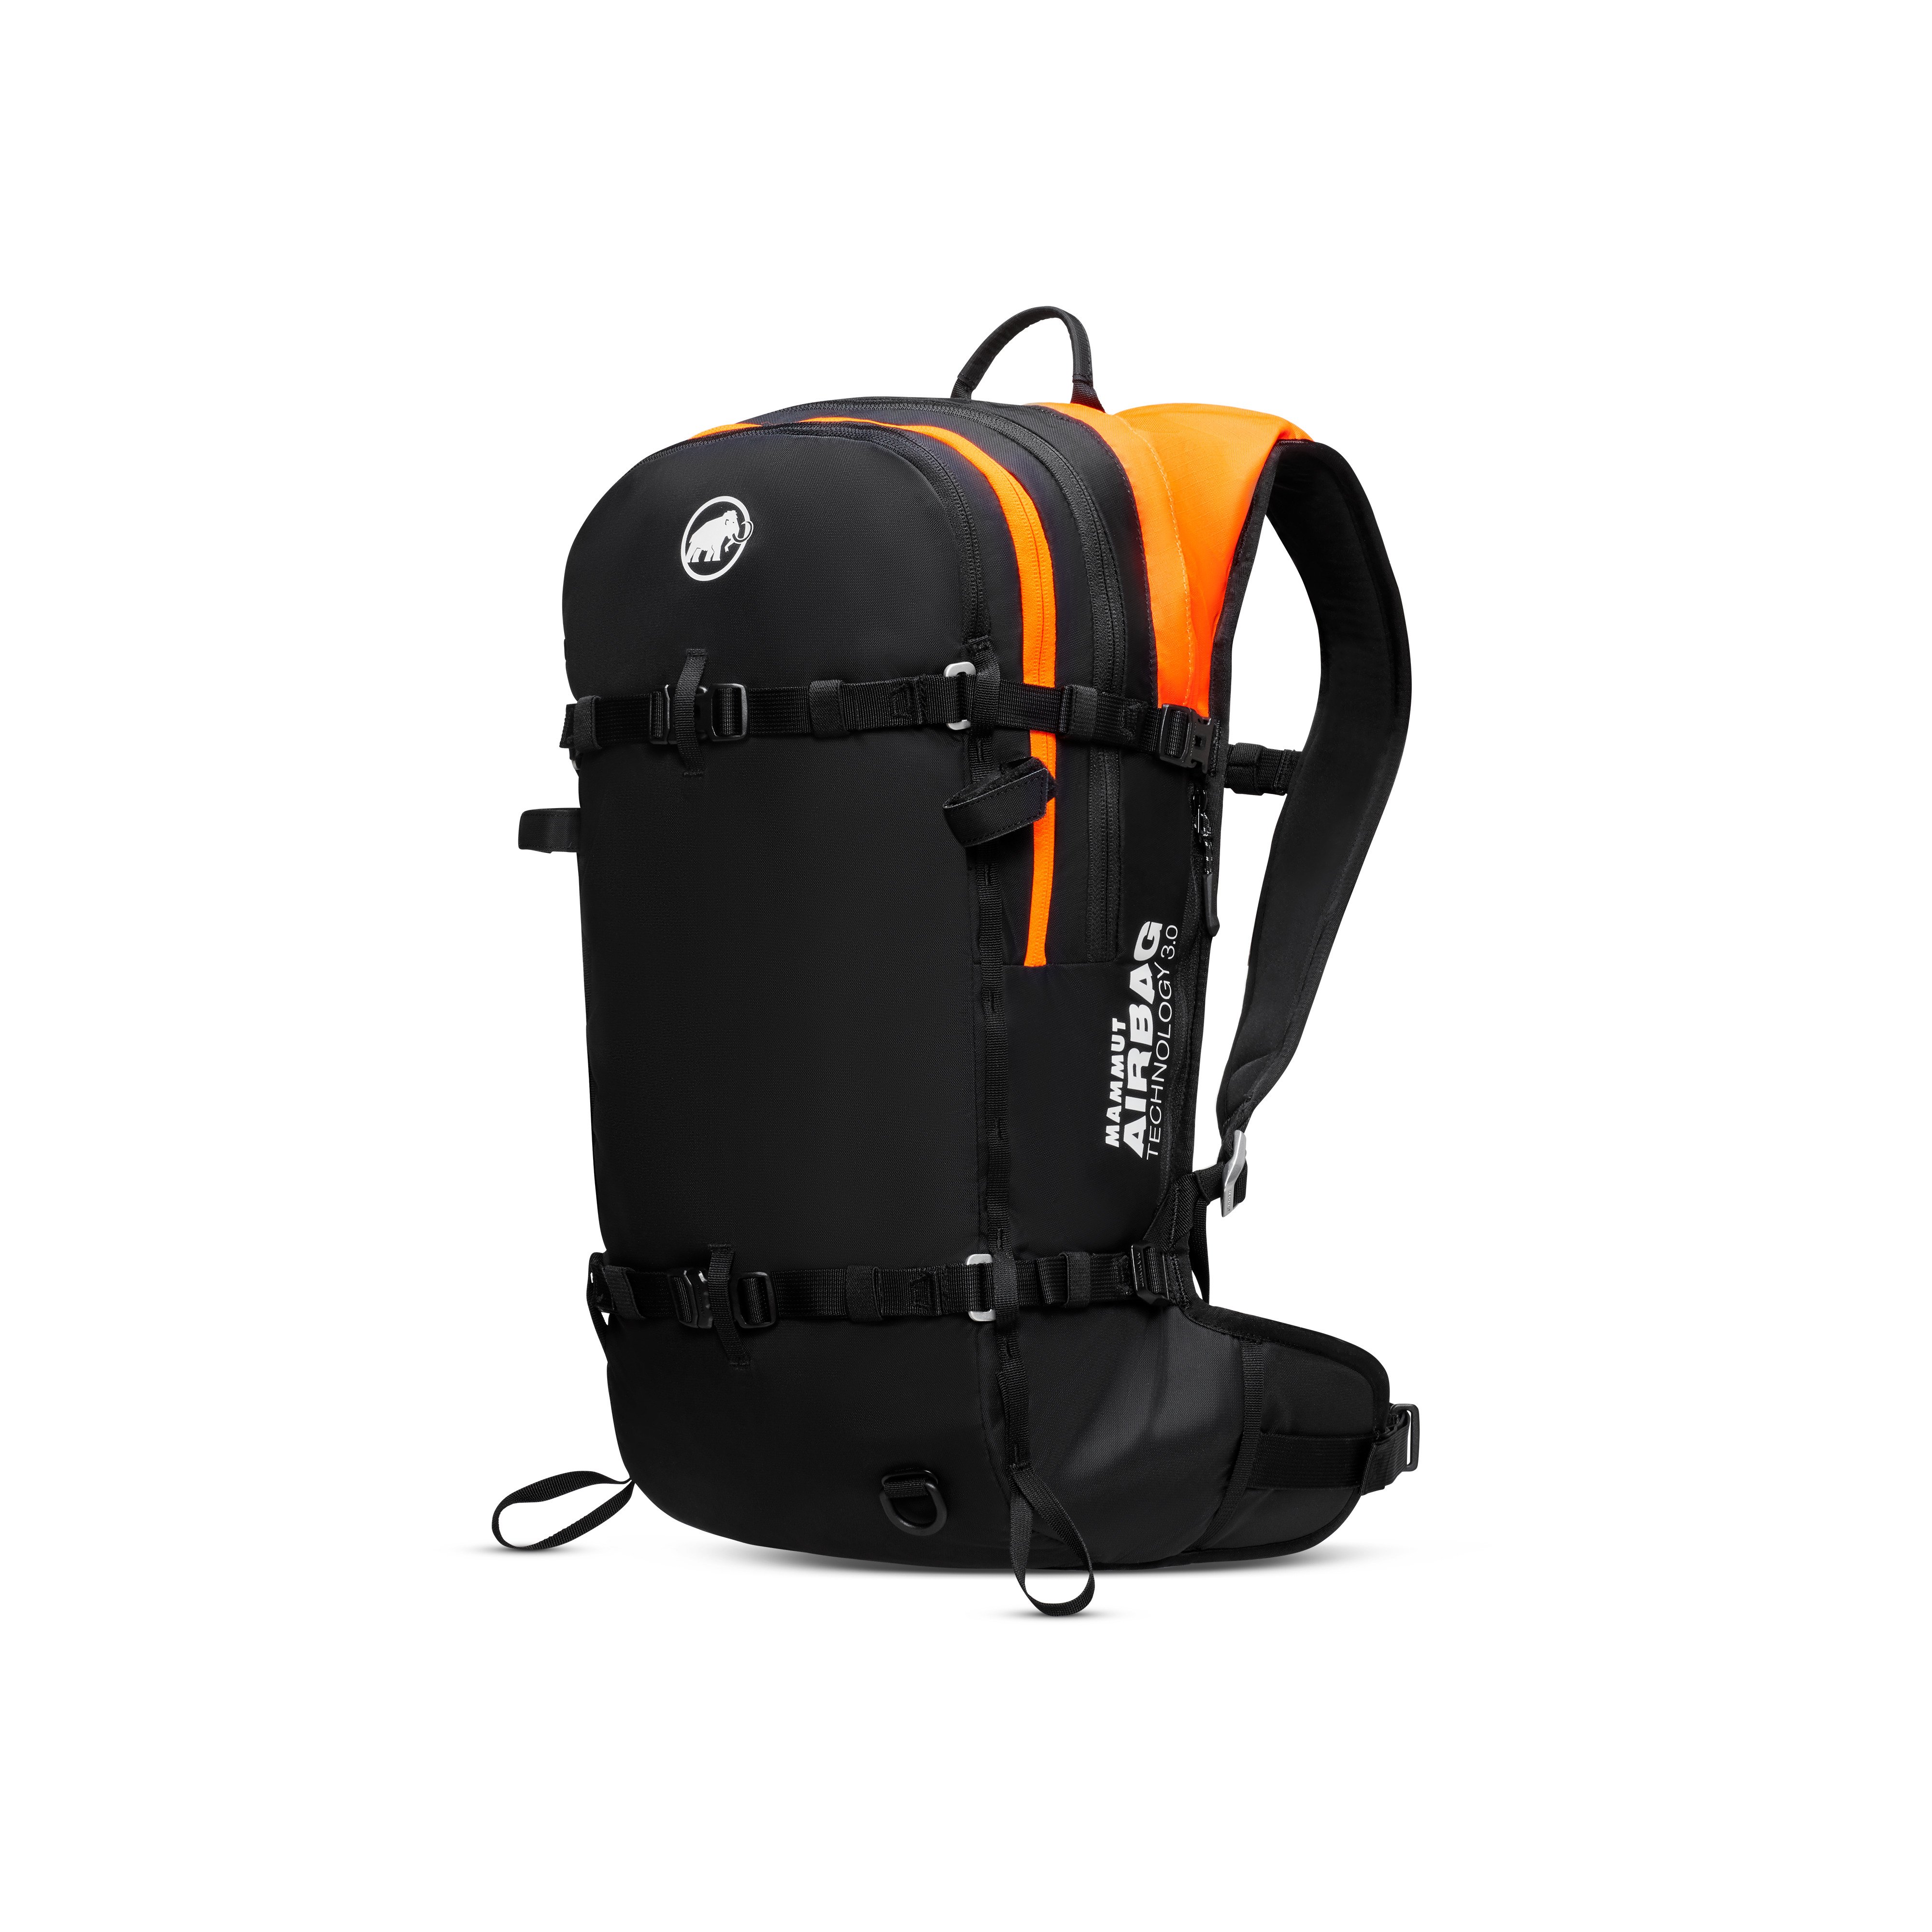 Free 22 Removable Airbag 3.0 ready - black, 22 L product image